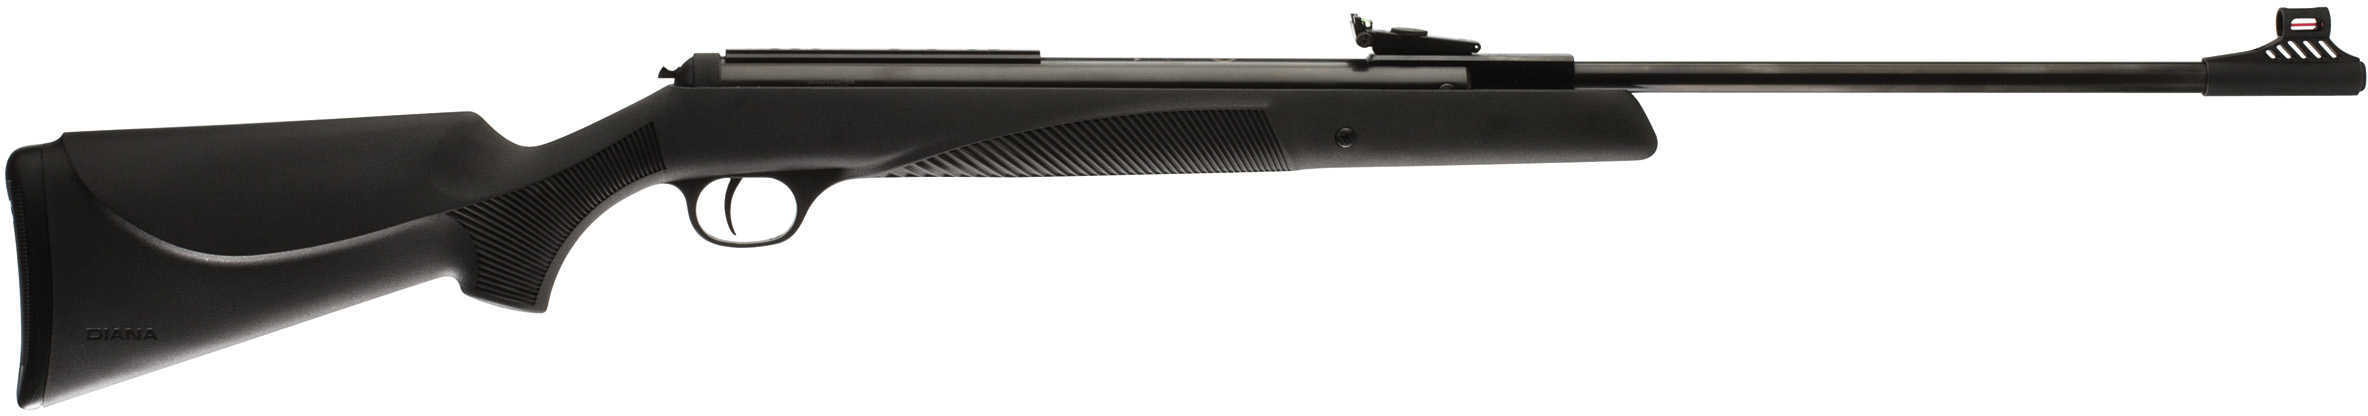 Umarex Air Rifle Panther .177 Caliber With Blued Barrel Synthetic Stock Airgun Md: 2166022